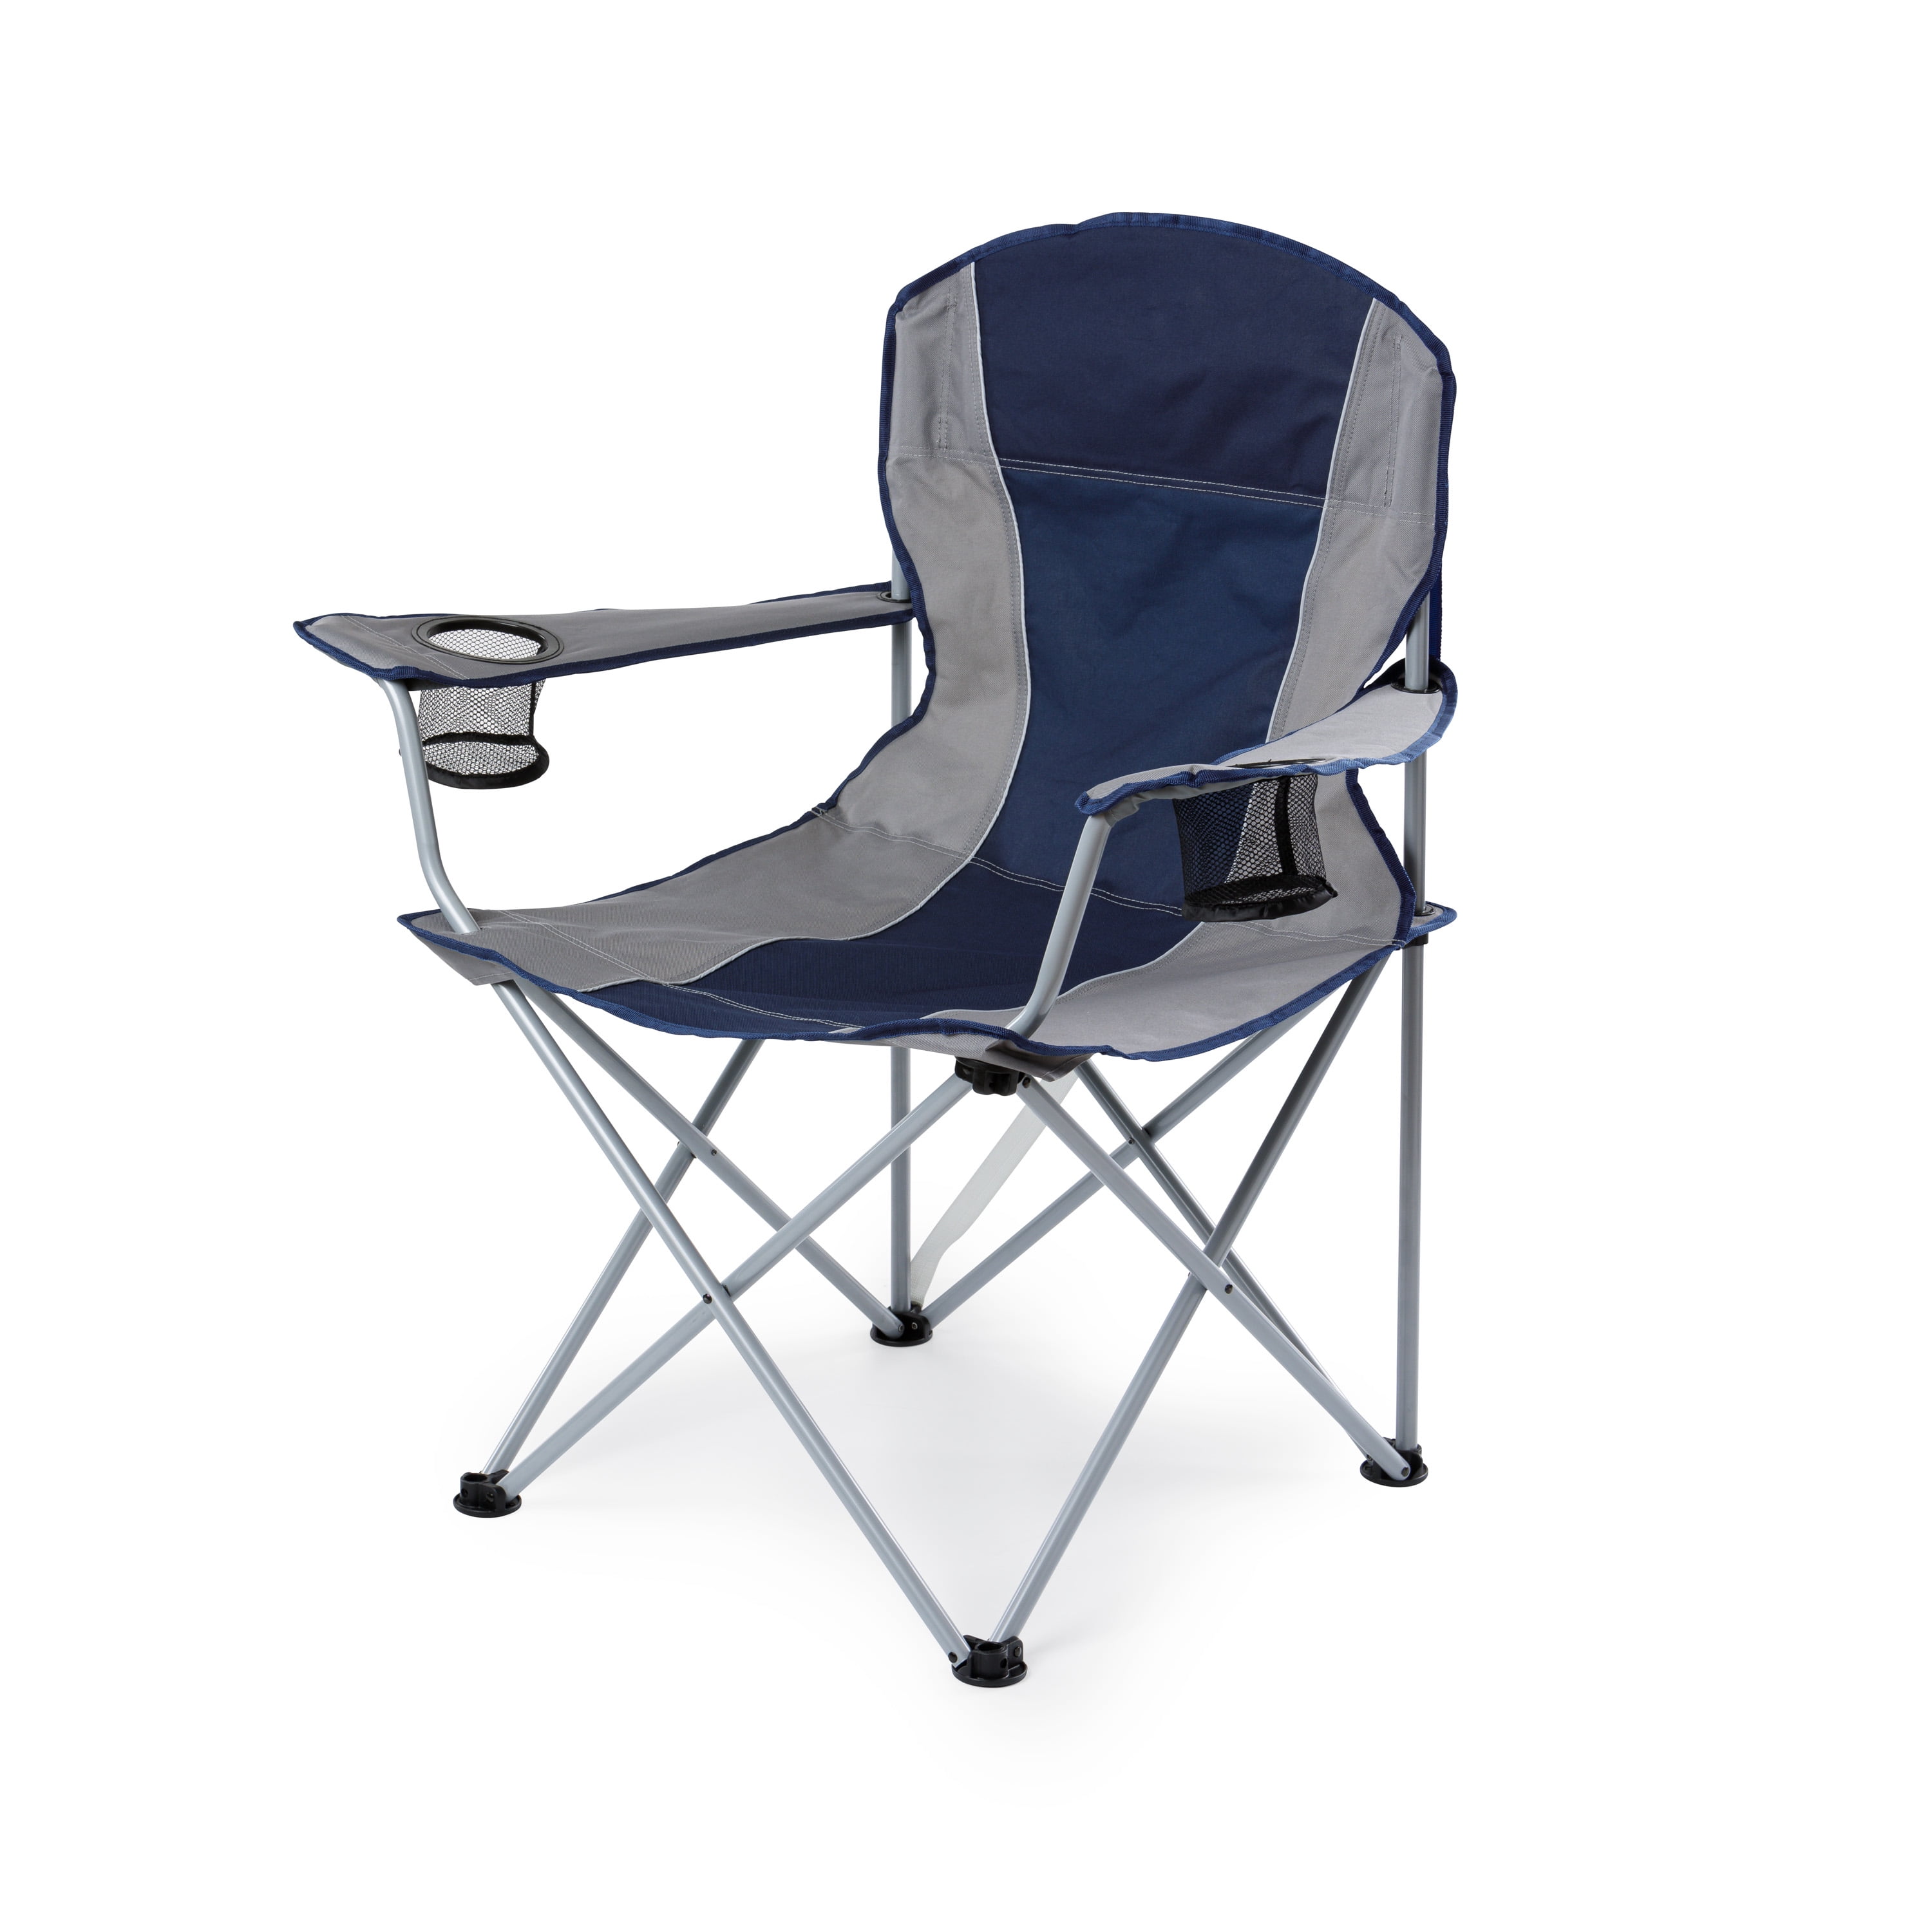 Coleman Ultimate Comfort Sling Chair Gray Folding Seat Portable Lounge Outdoor 